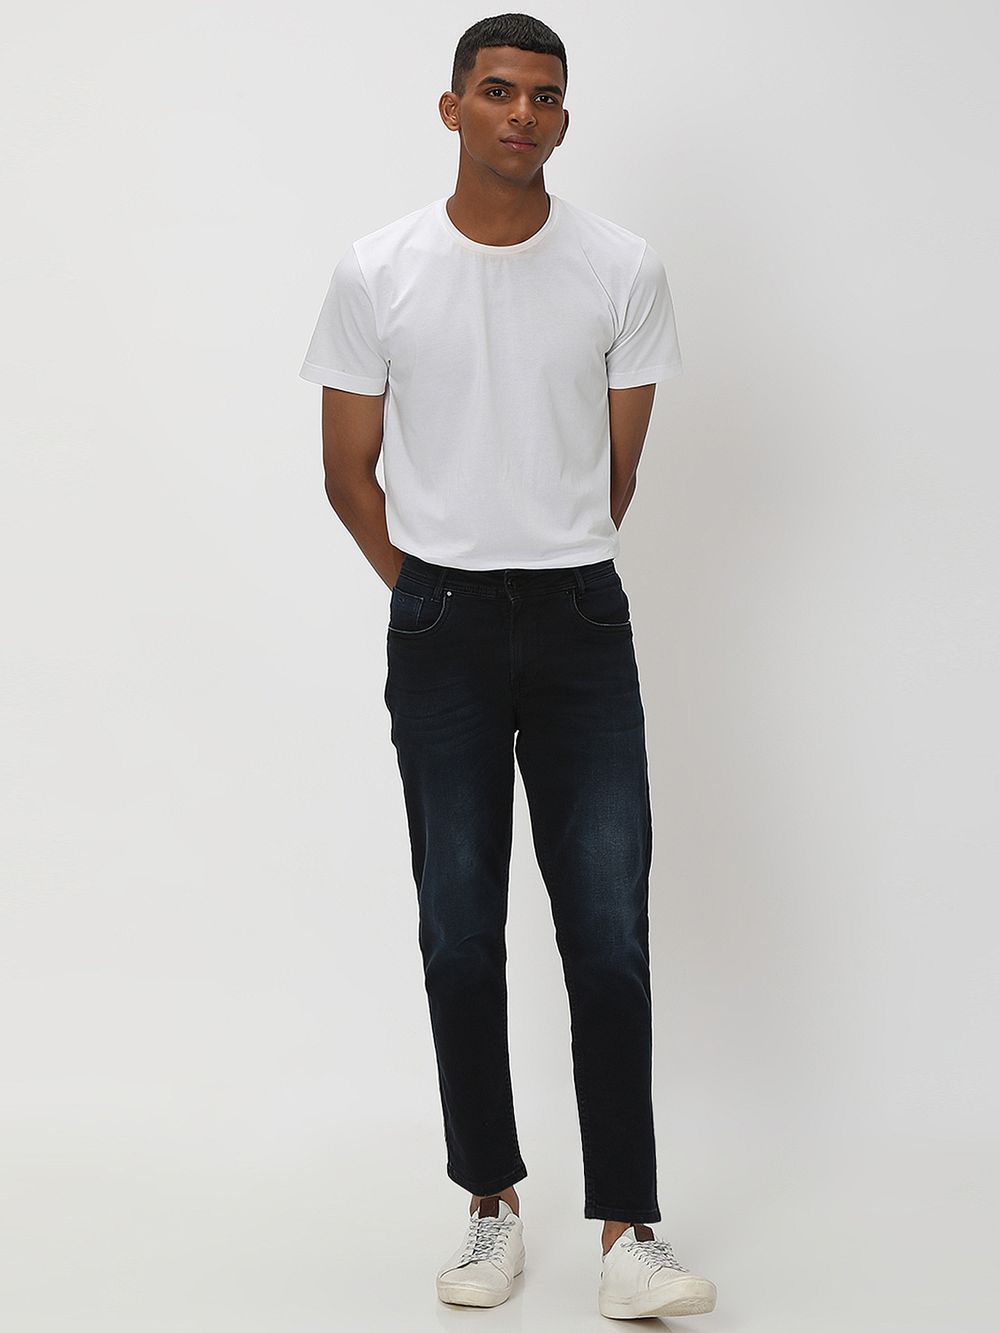 Blue Black Ankle Length Flyweight Jeans